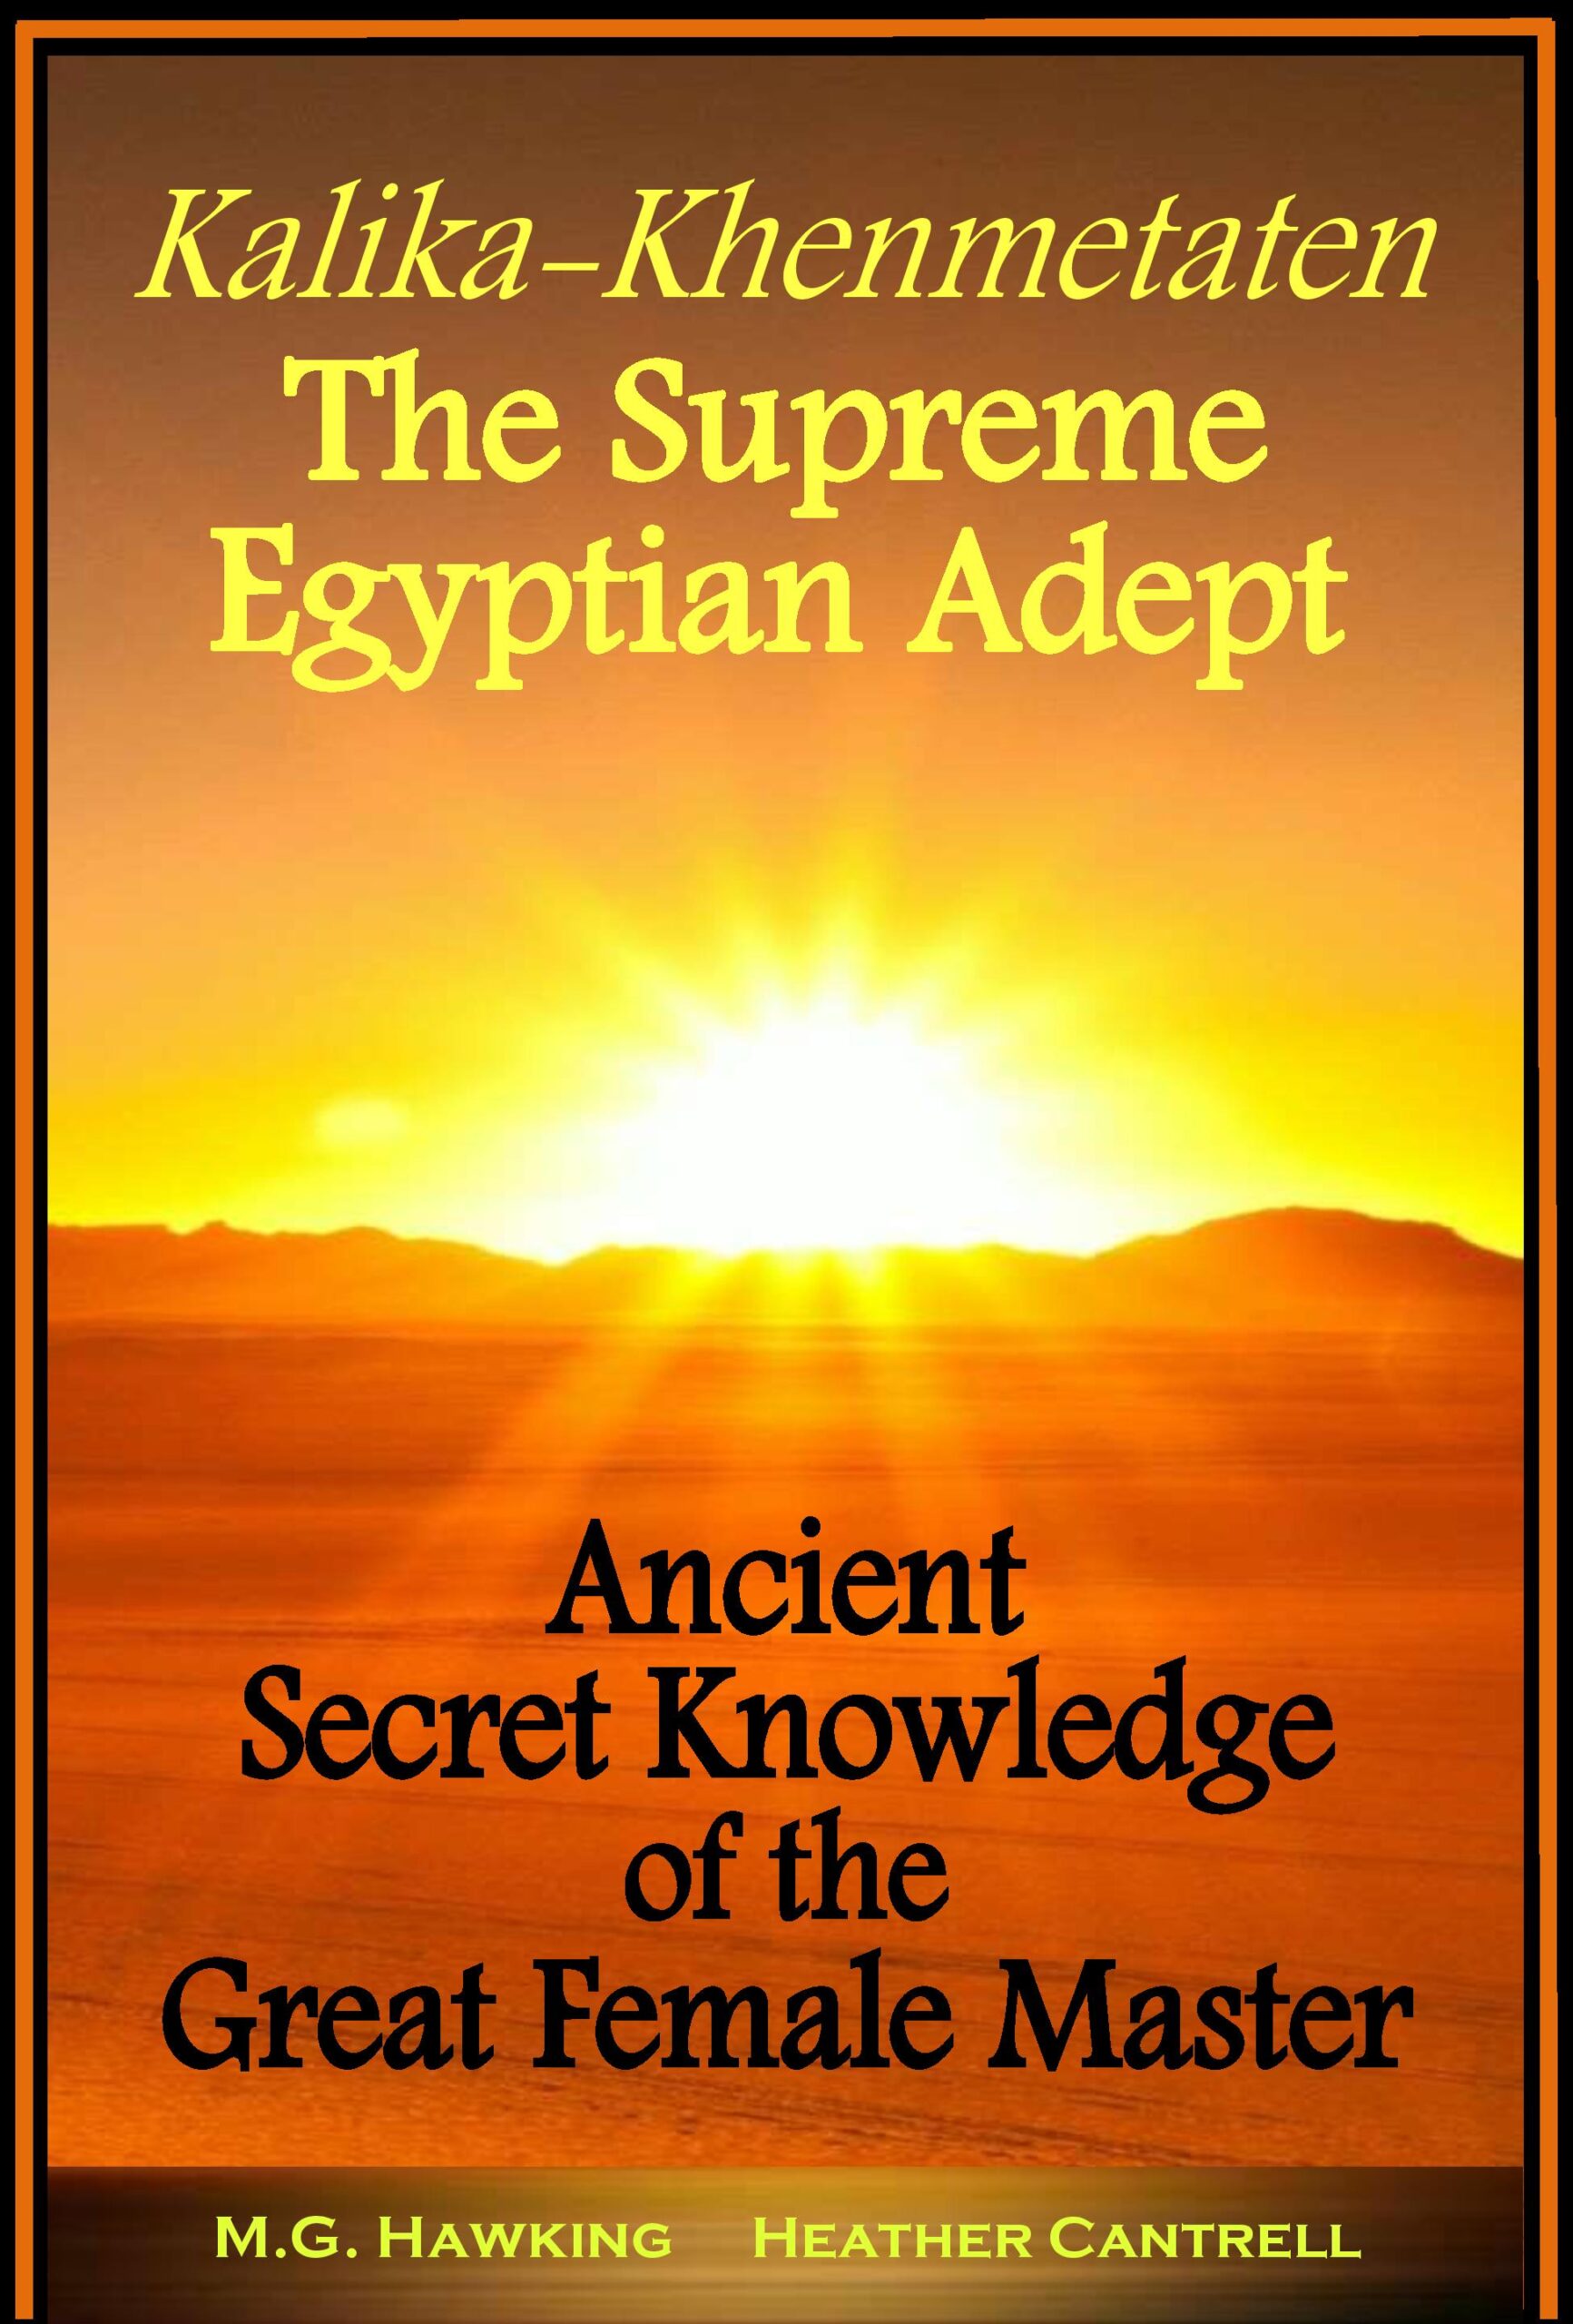 FREE: Kalika-Khenmetaten, the Supreme Egyptian Adept: Ancient Secret Knowledge of the Great Female Master by Michael Hawking